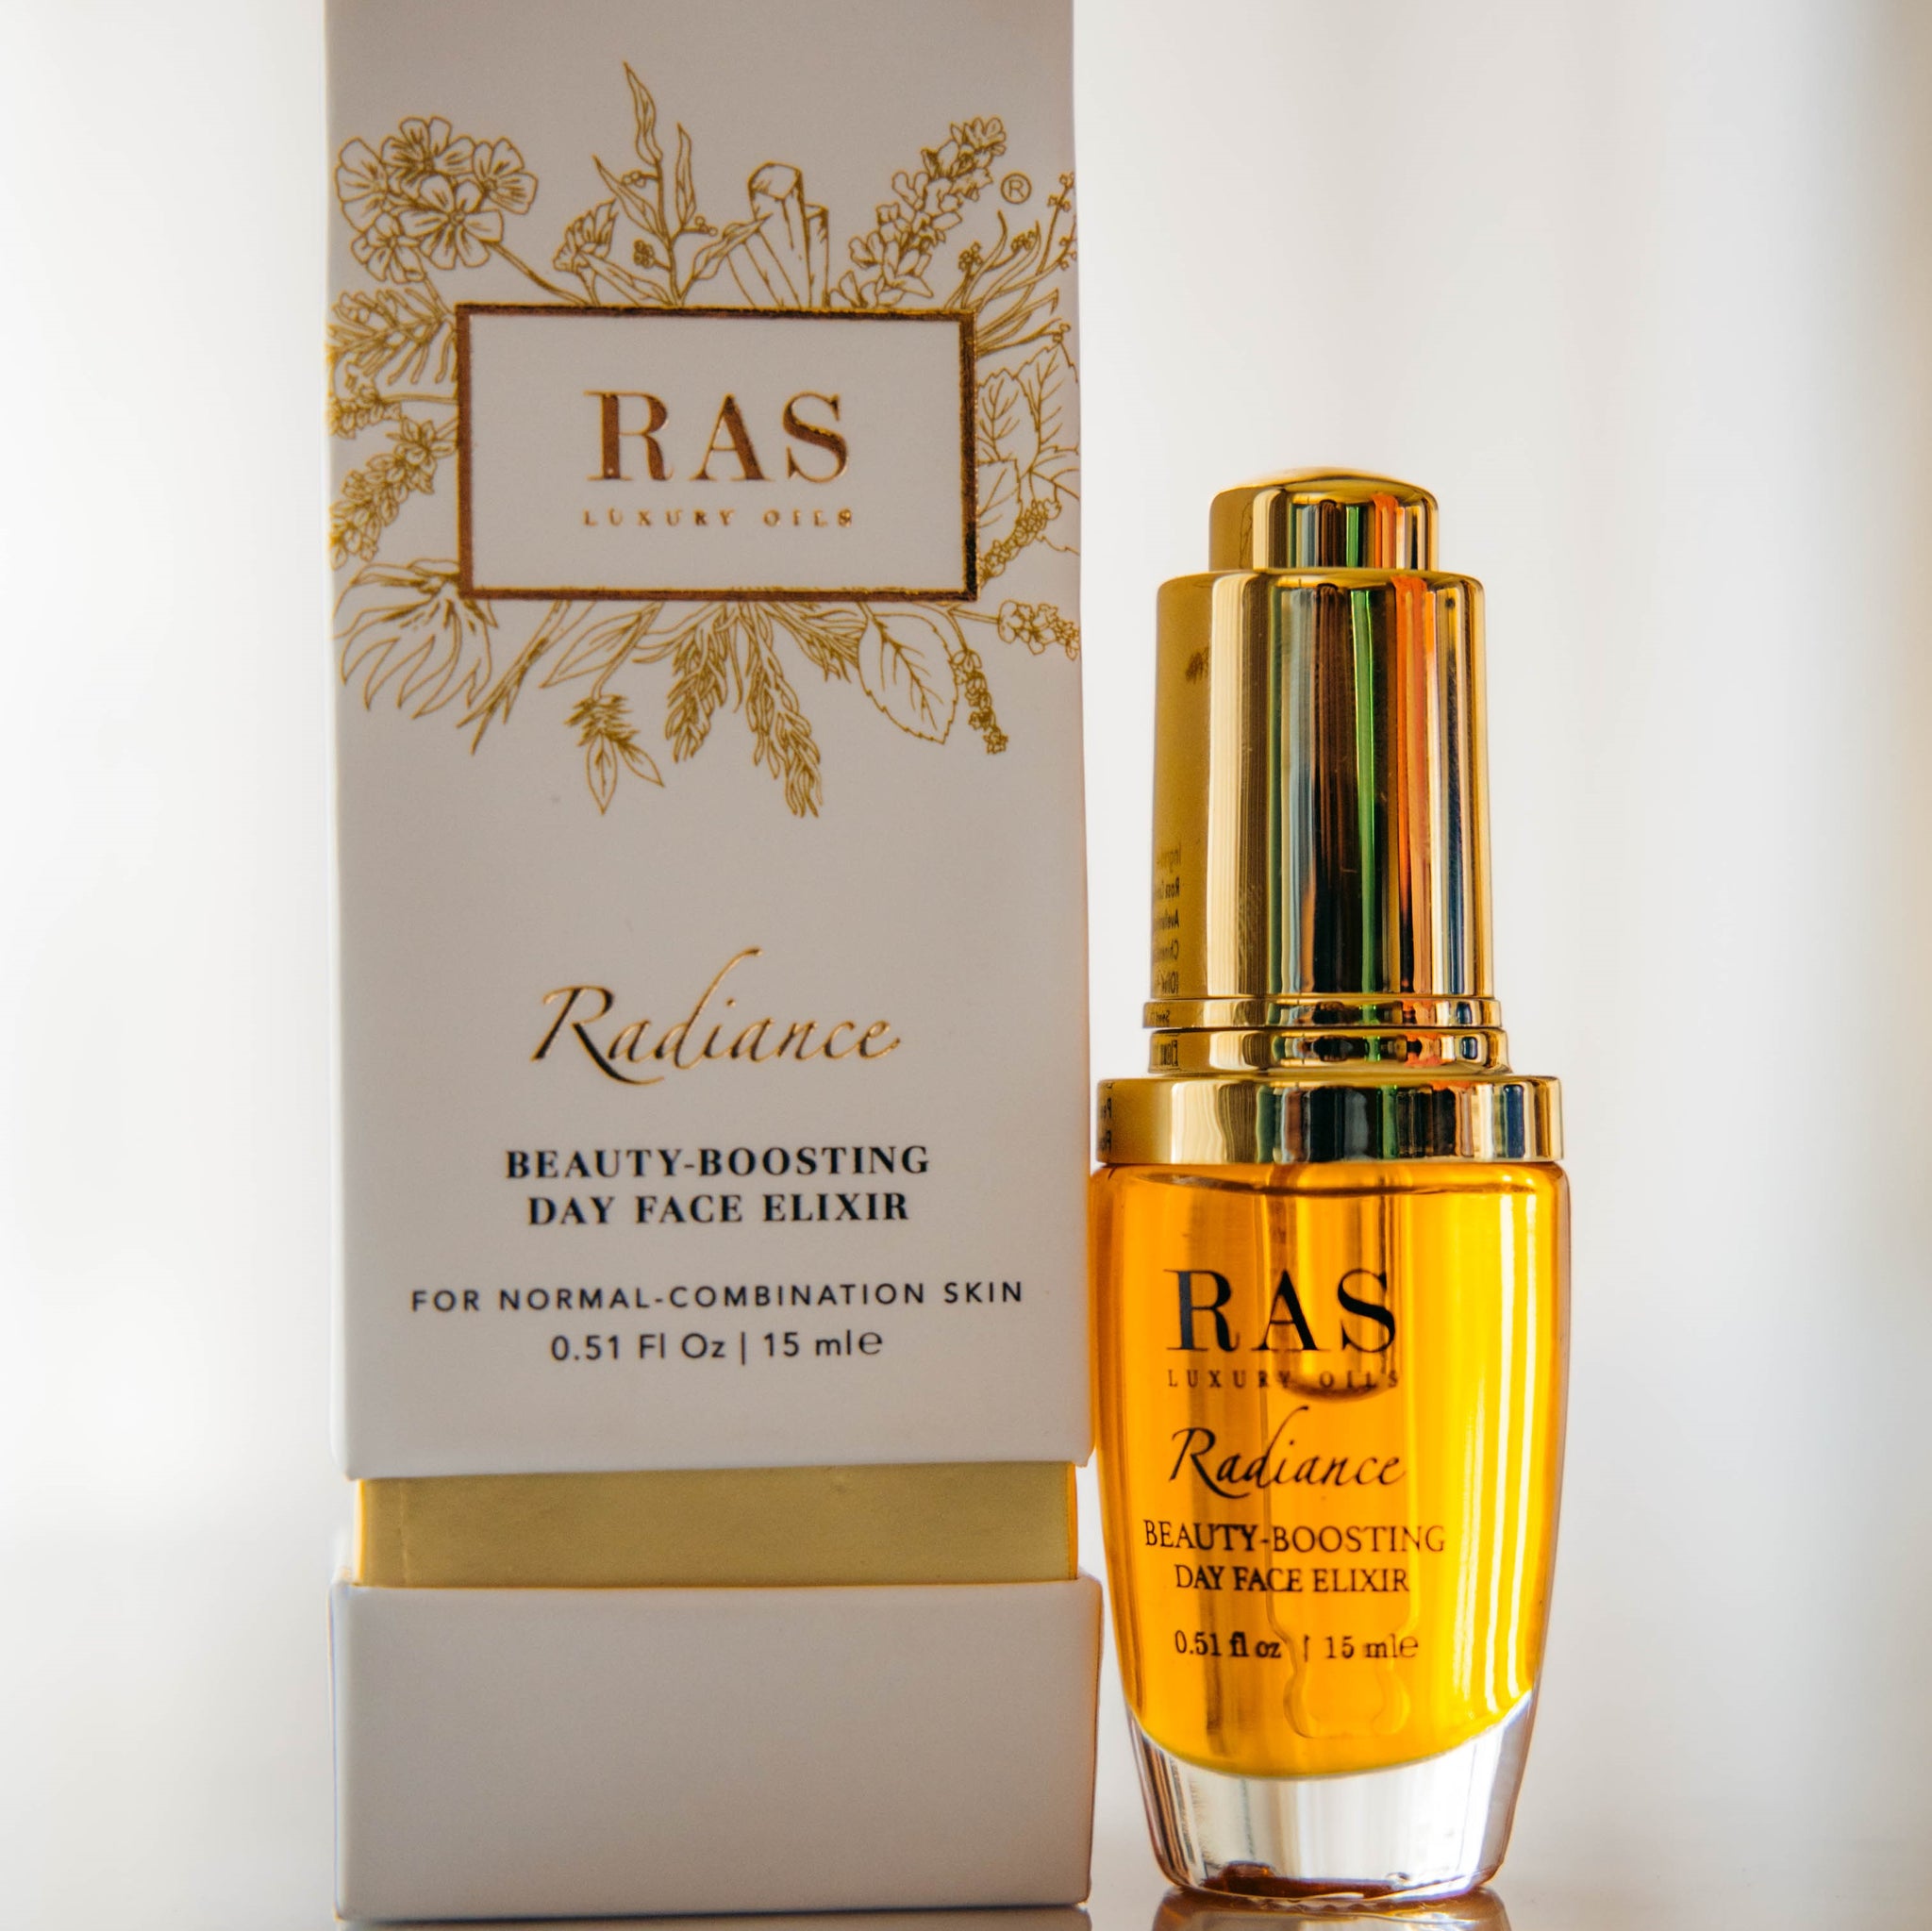 RAS Radiance Beauty-Boosting Day Face Elixir